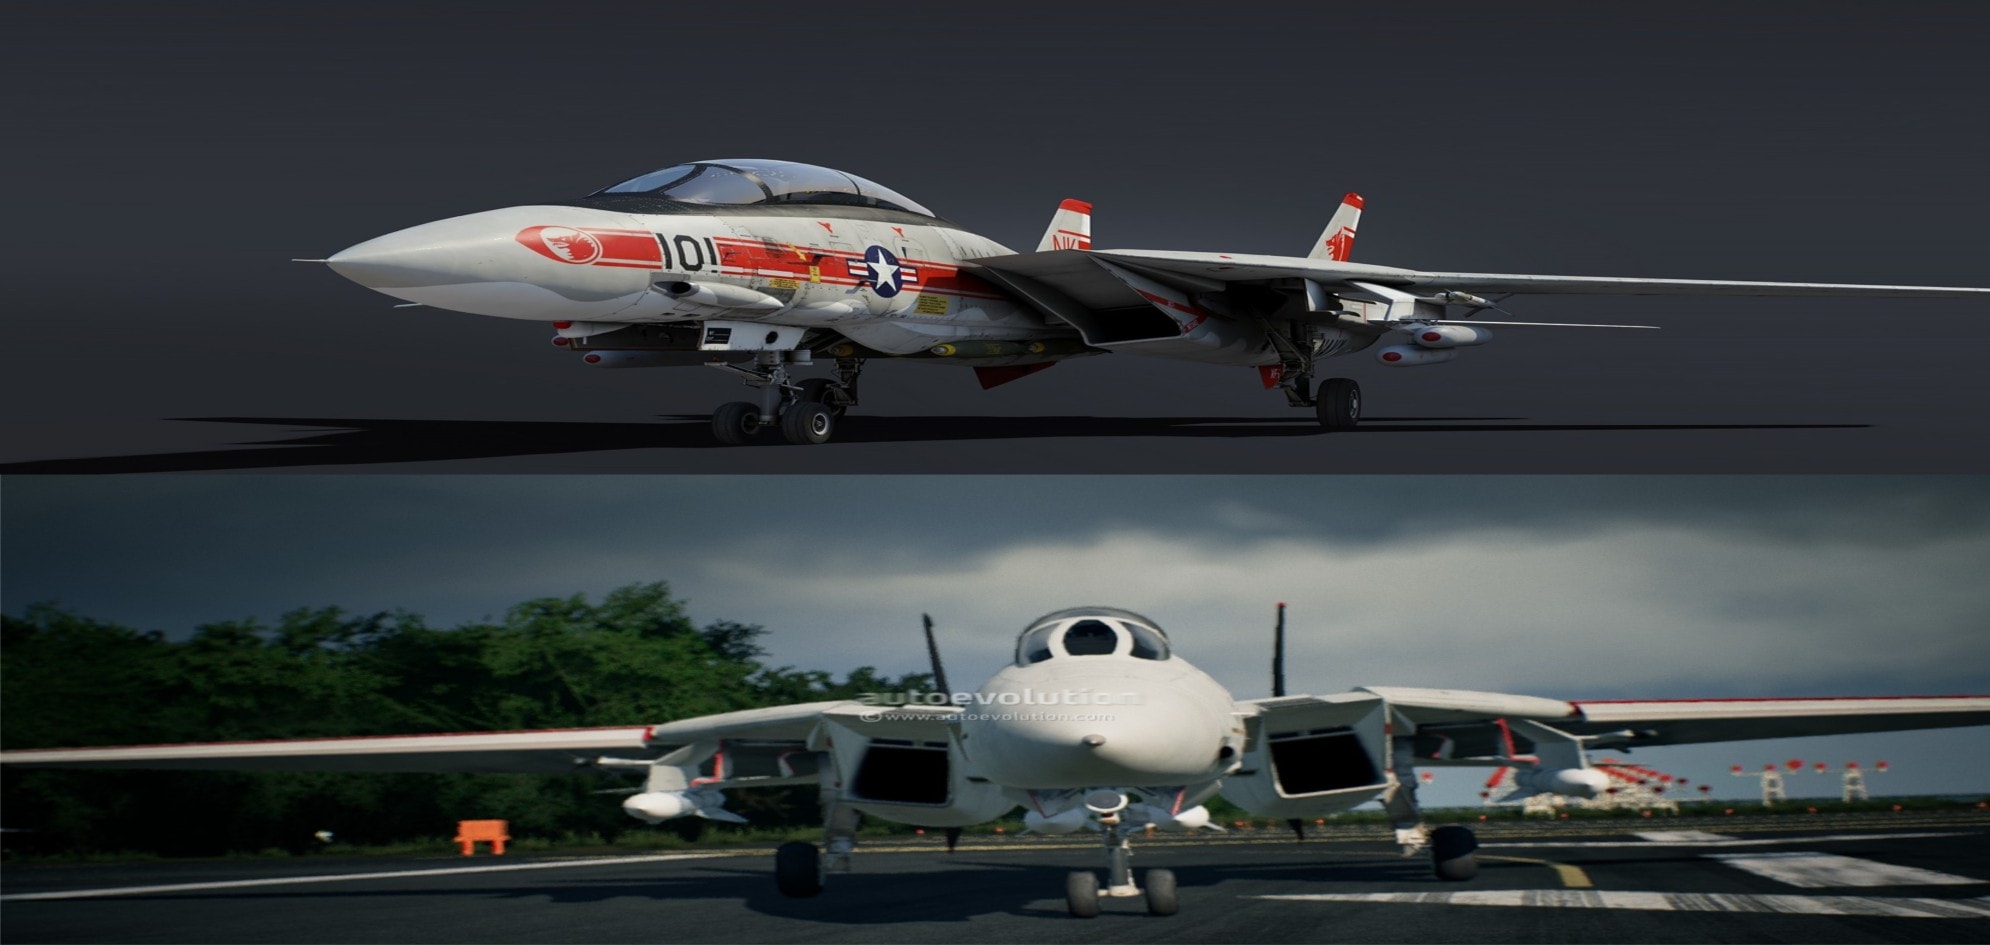 War Thunder Vs Ace Combat 7 Whose F 14 Tomcat Is More Fun To Fly